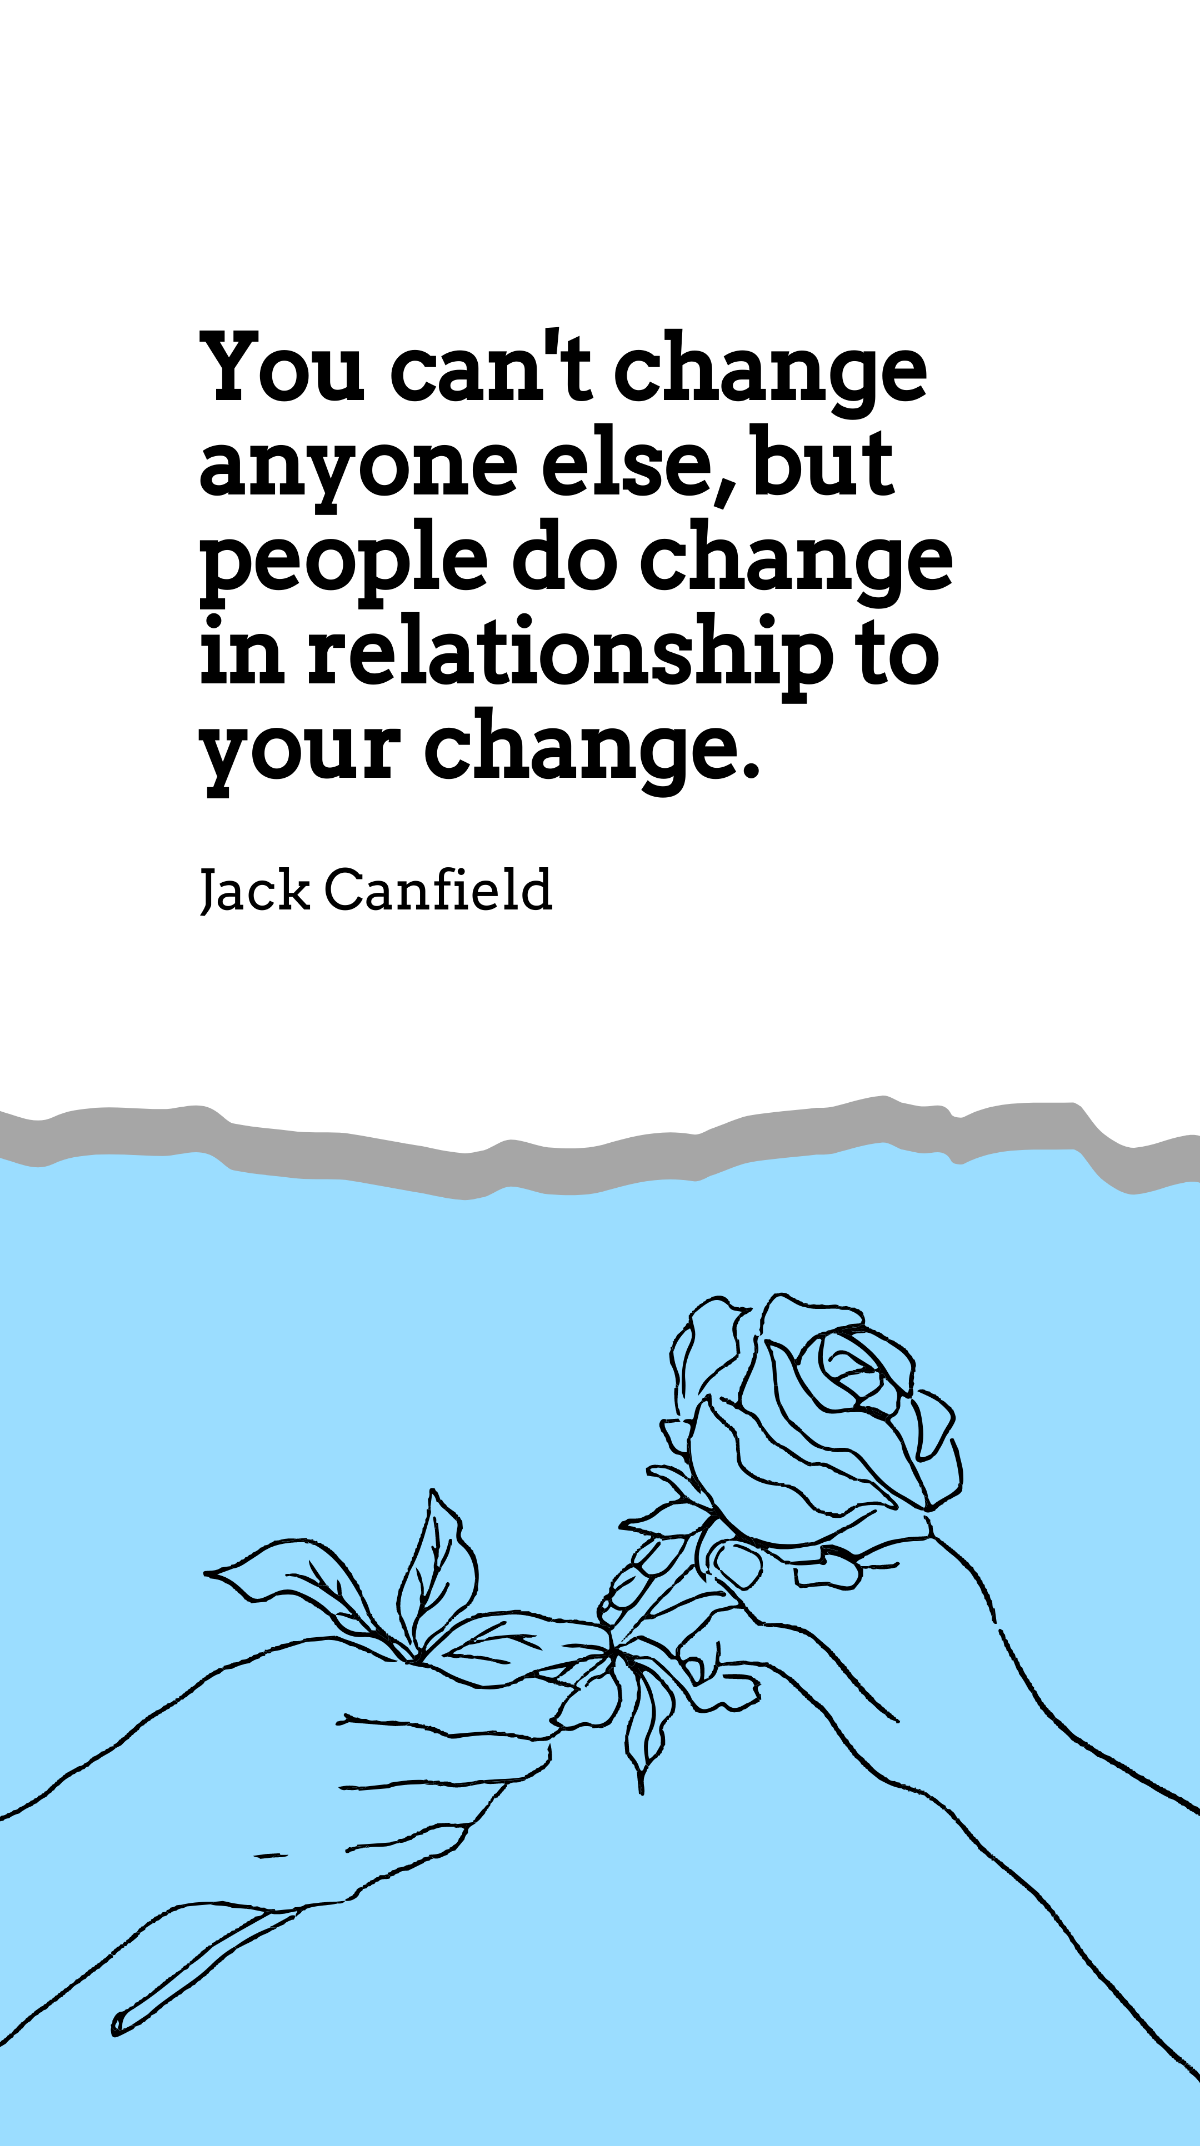 Jack Canfield - You can't change anyone else, but people do change in relationship to your change. Template